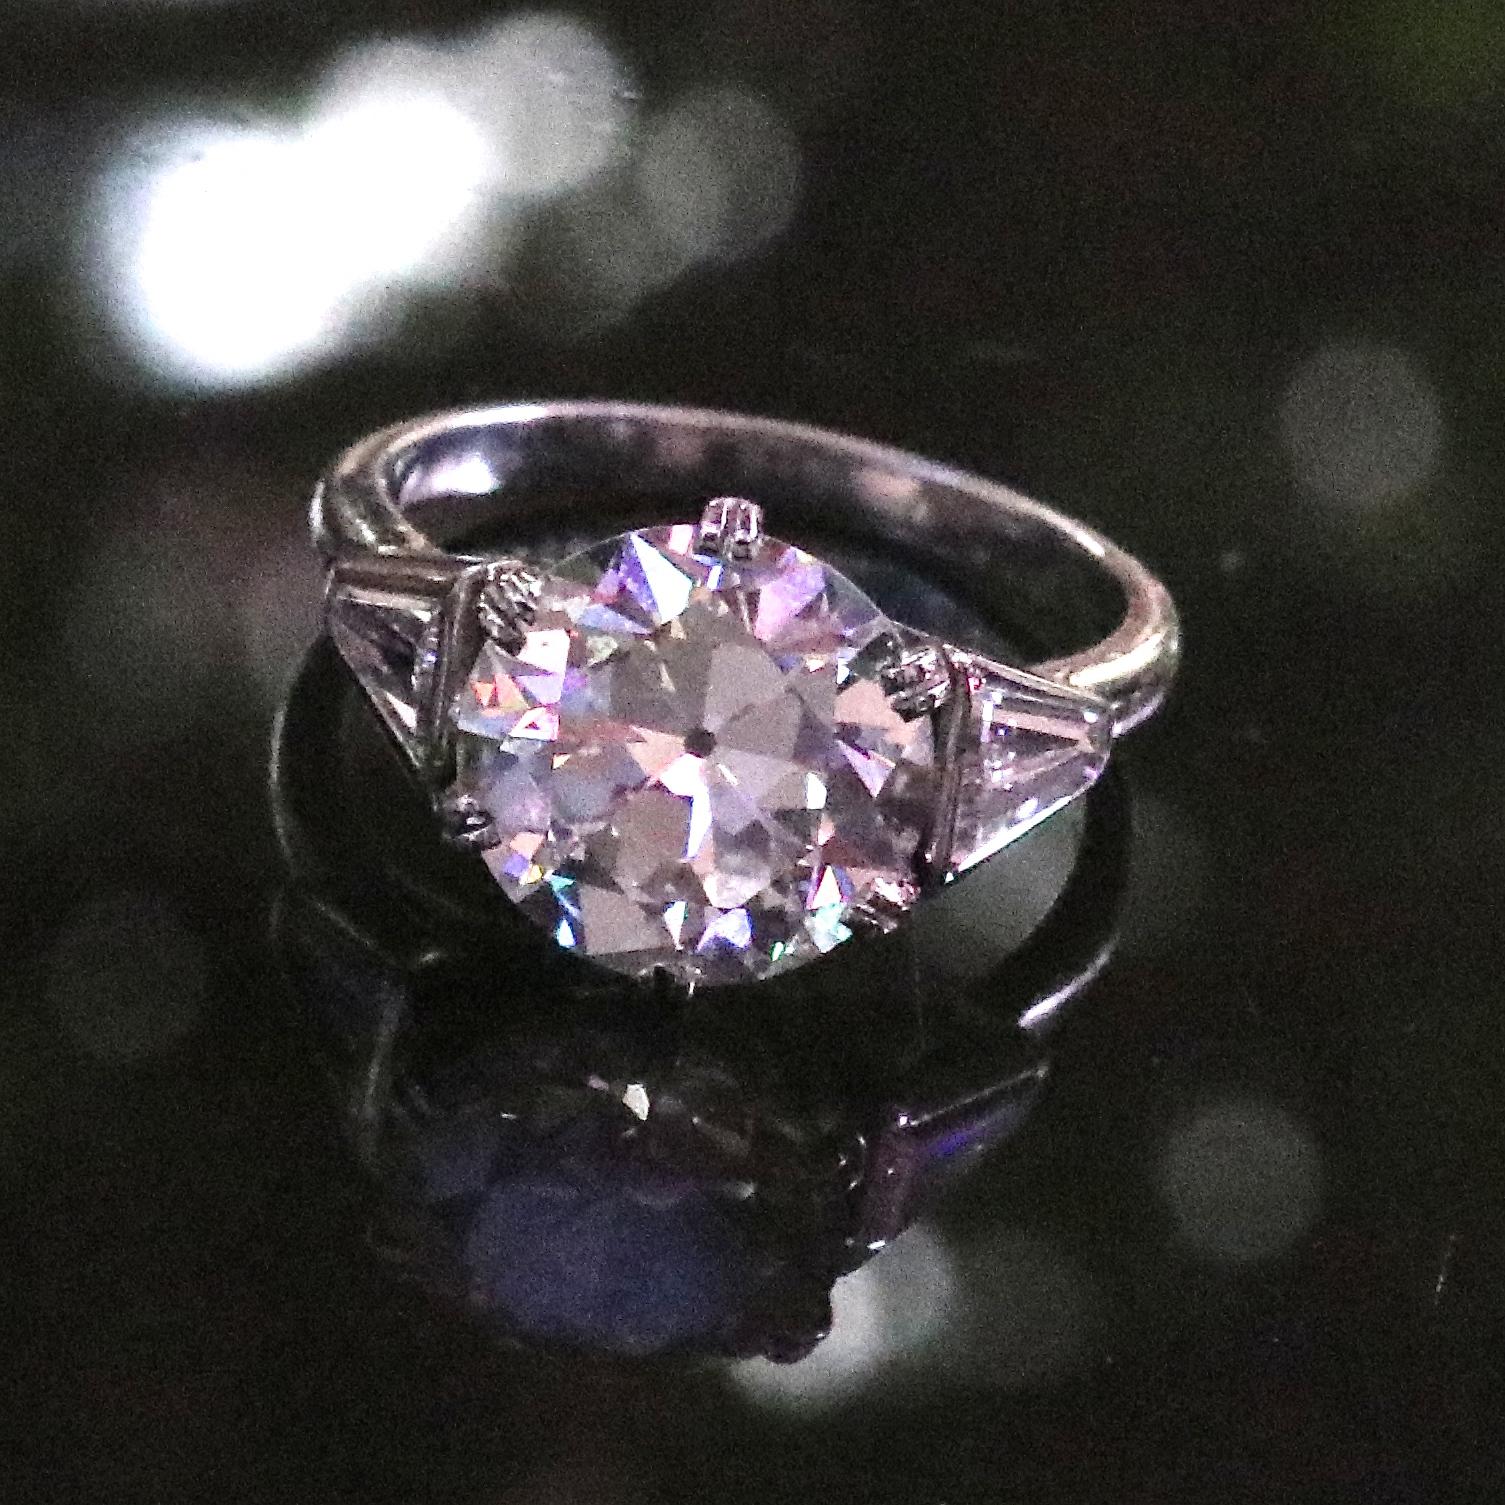 Three exquisite old cuts in one fabulous engagement ring. This original Art Deco diamond platinum ring features a GIA 3.52 old European cut diamond, graded I color, VS1 clarity.  Accompanied by 2 old trillion cut diamonds that weigh approximately